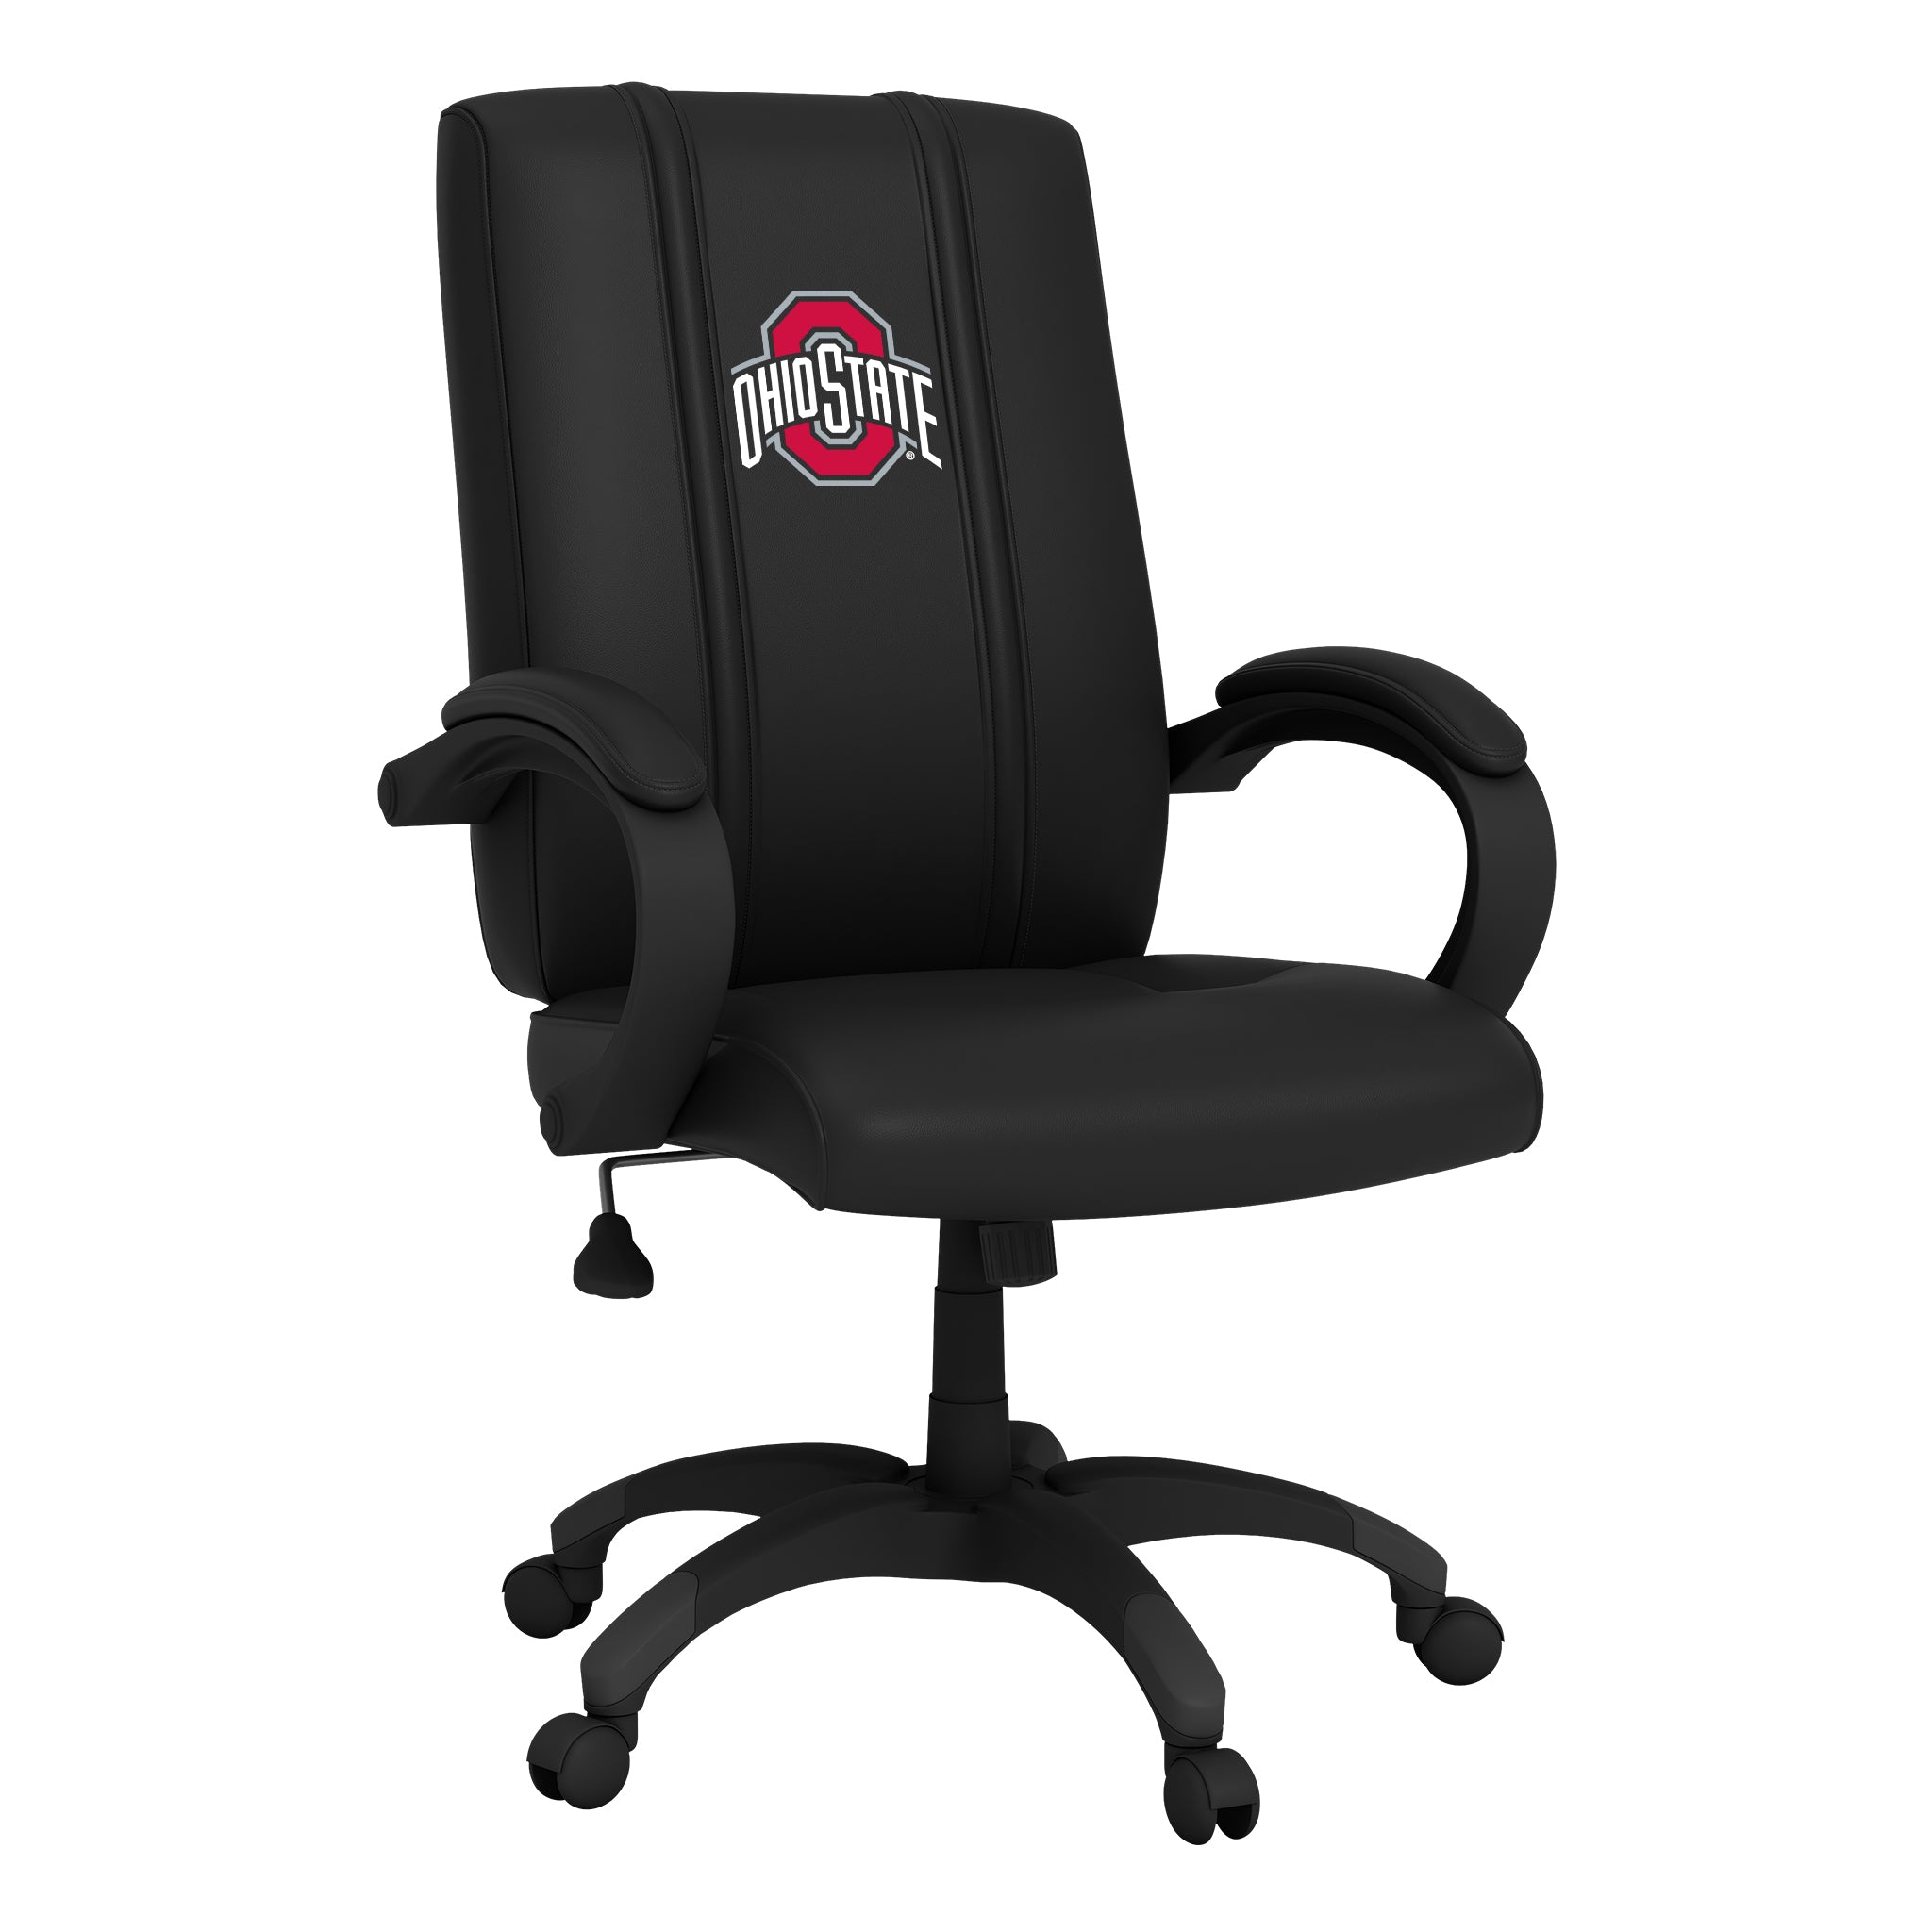 Ohio State Office Chair 1000 with Ohio State Primary Logo